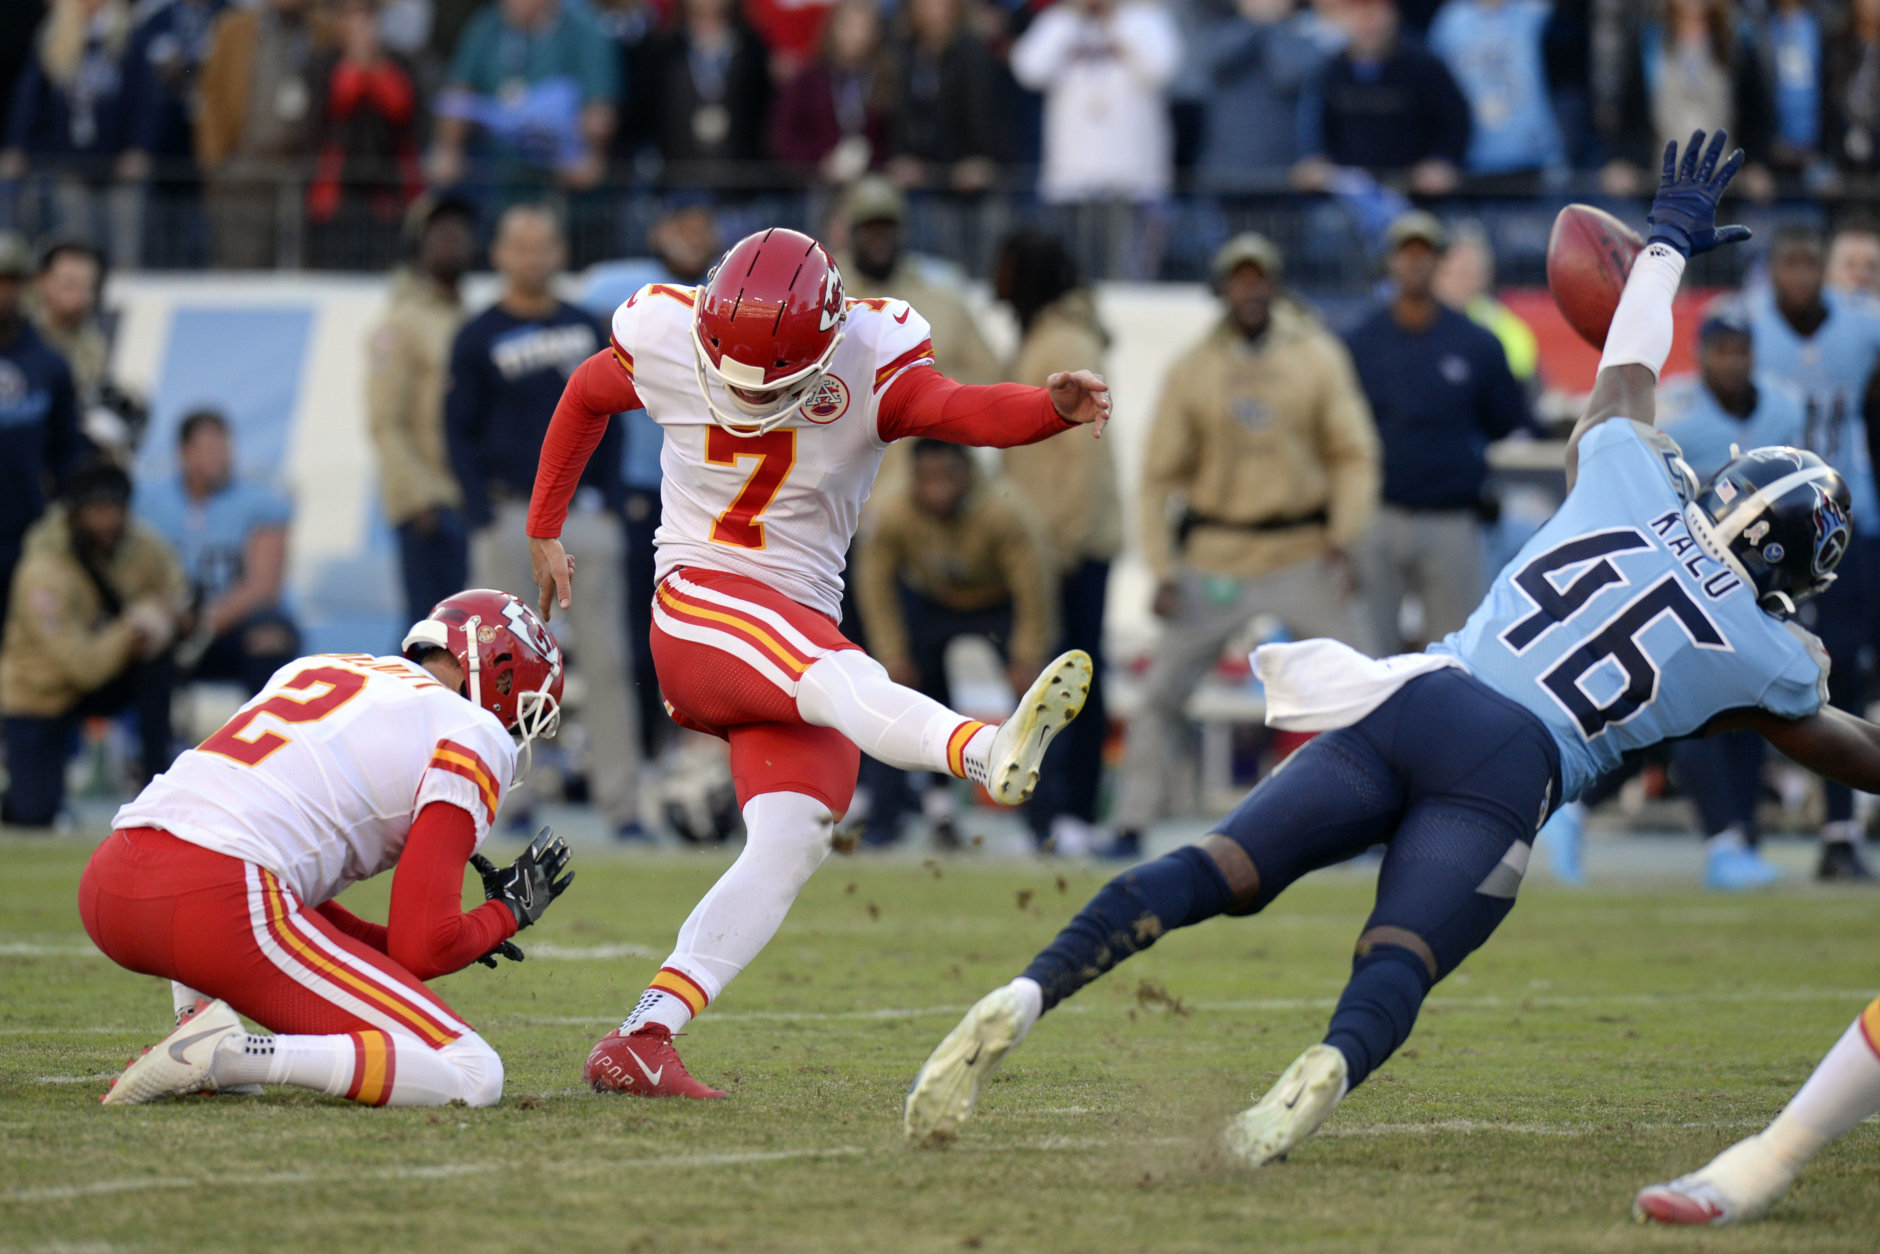 <p><b><i>Chiefs 32</i></b><br />
<b><i>Titans 35</i></b></p>
<p>Here&#8217;s your weekly reminder that Kansas City doesn&#8217;t have much beyond Patrick Mahomes and the passing game. The defense got torched by Ryan Tannehill at a critical juncture and <a href="https://profootballtalk.nbcsports.com/2019/11/10/titans-say-they-timed-chiefs-cadence-to-block-last-second-field-goal/" target="_blank" rel="noopener">the predictable special teams</a> got the potential game-tying field goal blocked emphatically like Dikembe Mutombo was coming off the edge. The Chiefs are in trouble.</p>
